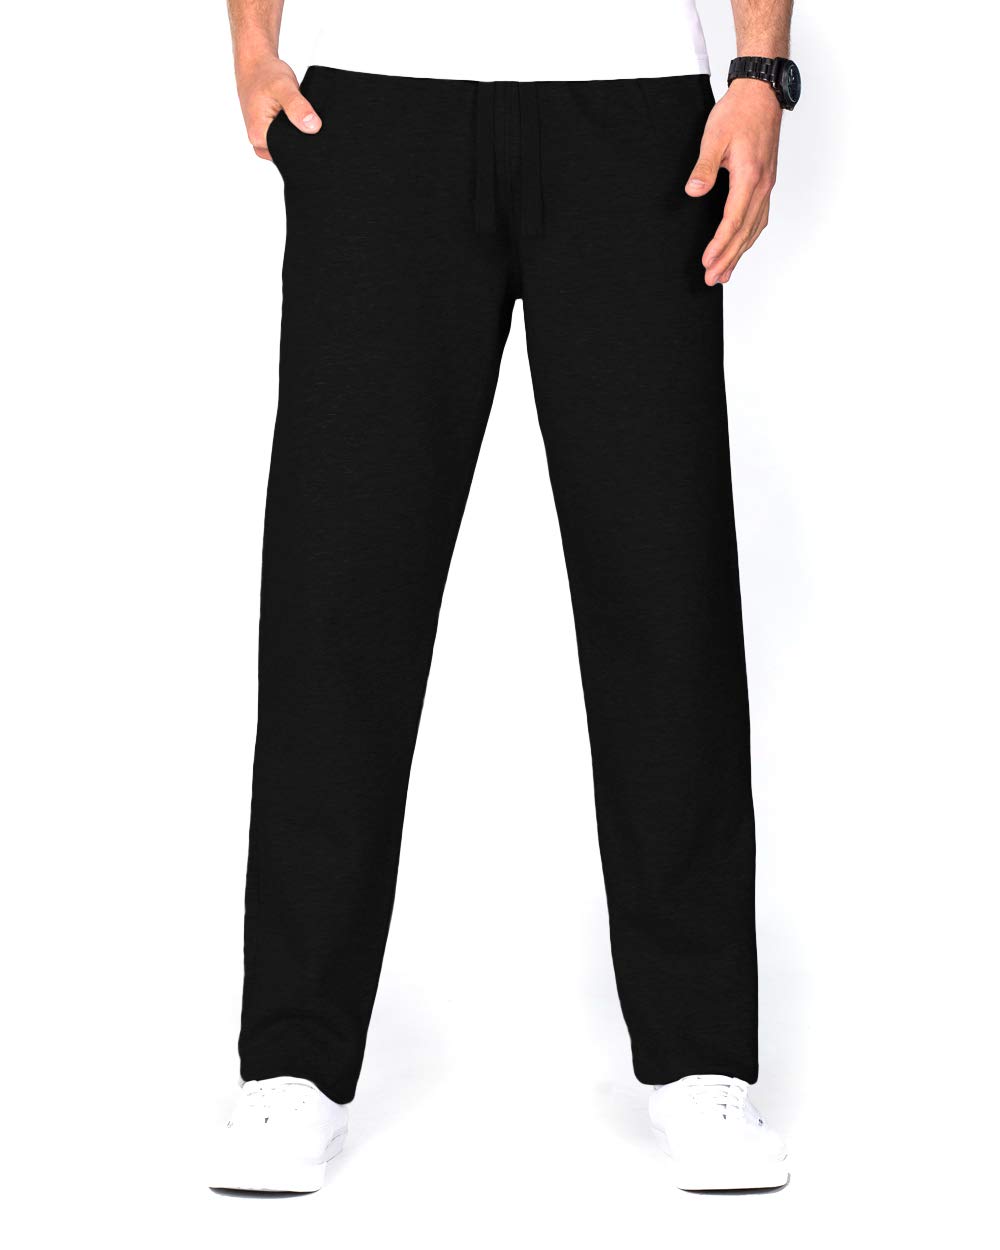 Idtswch 34/36/38/40 Long Inseam Men's Tall Yoga Sweatpants Open Bottom  Joggers Casual Loose Fit Athletic Pants with Pockets Tall(34inseam) X-Large  Black